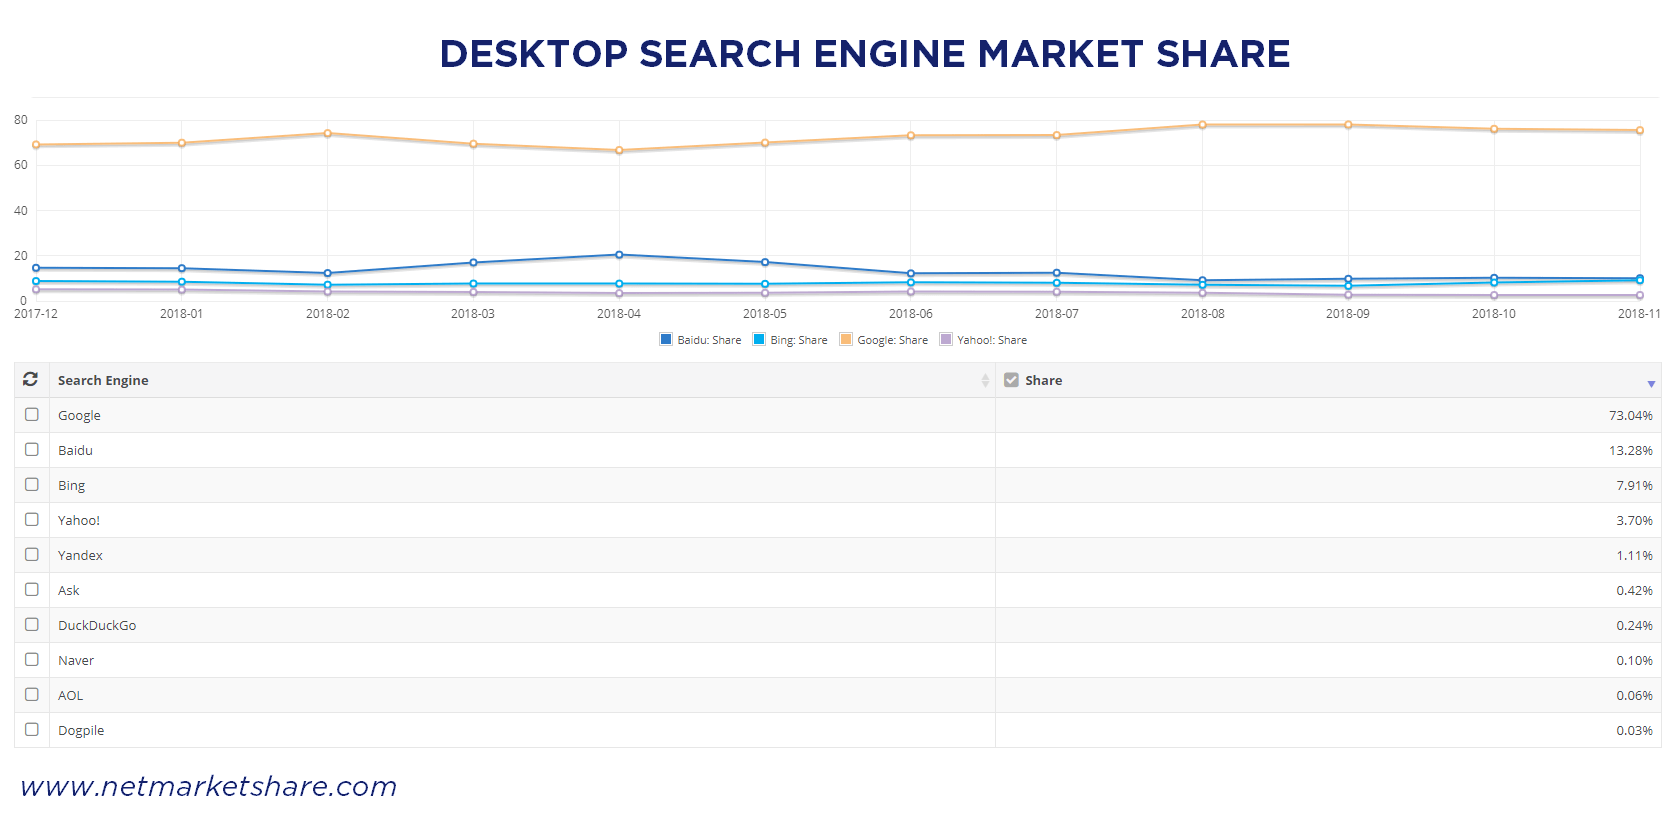 which search engine is best? Google has the most search engine market share